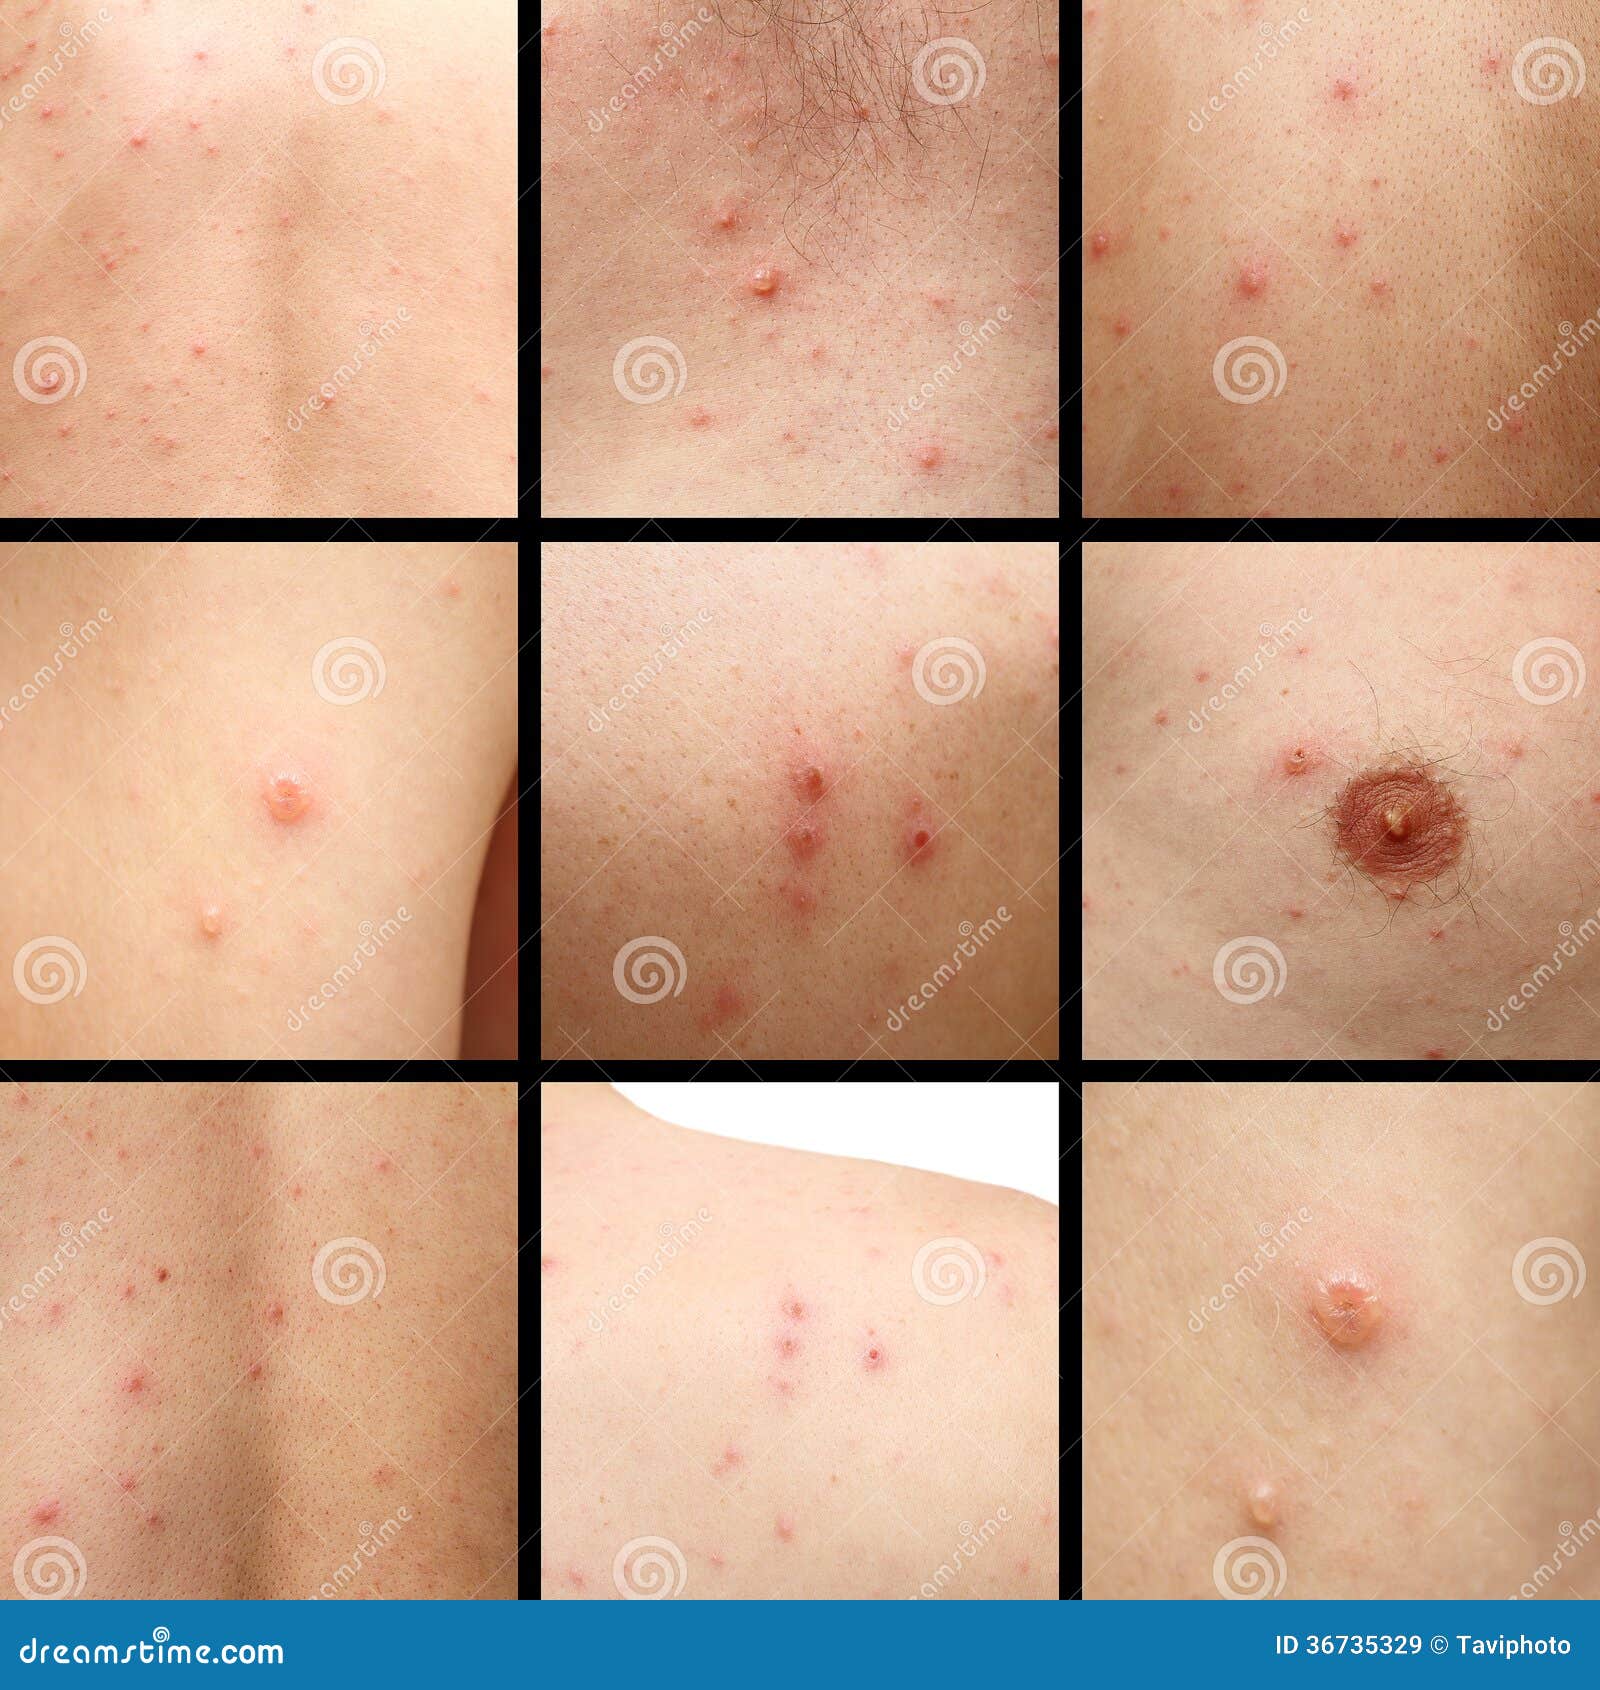 Chicken Pox On Human Skin Royalty Free Stock Images Image 36735329